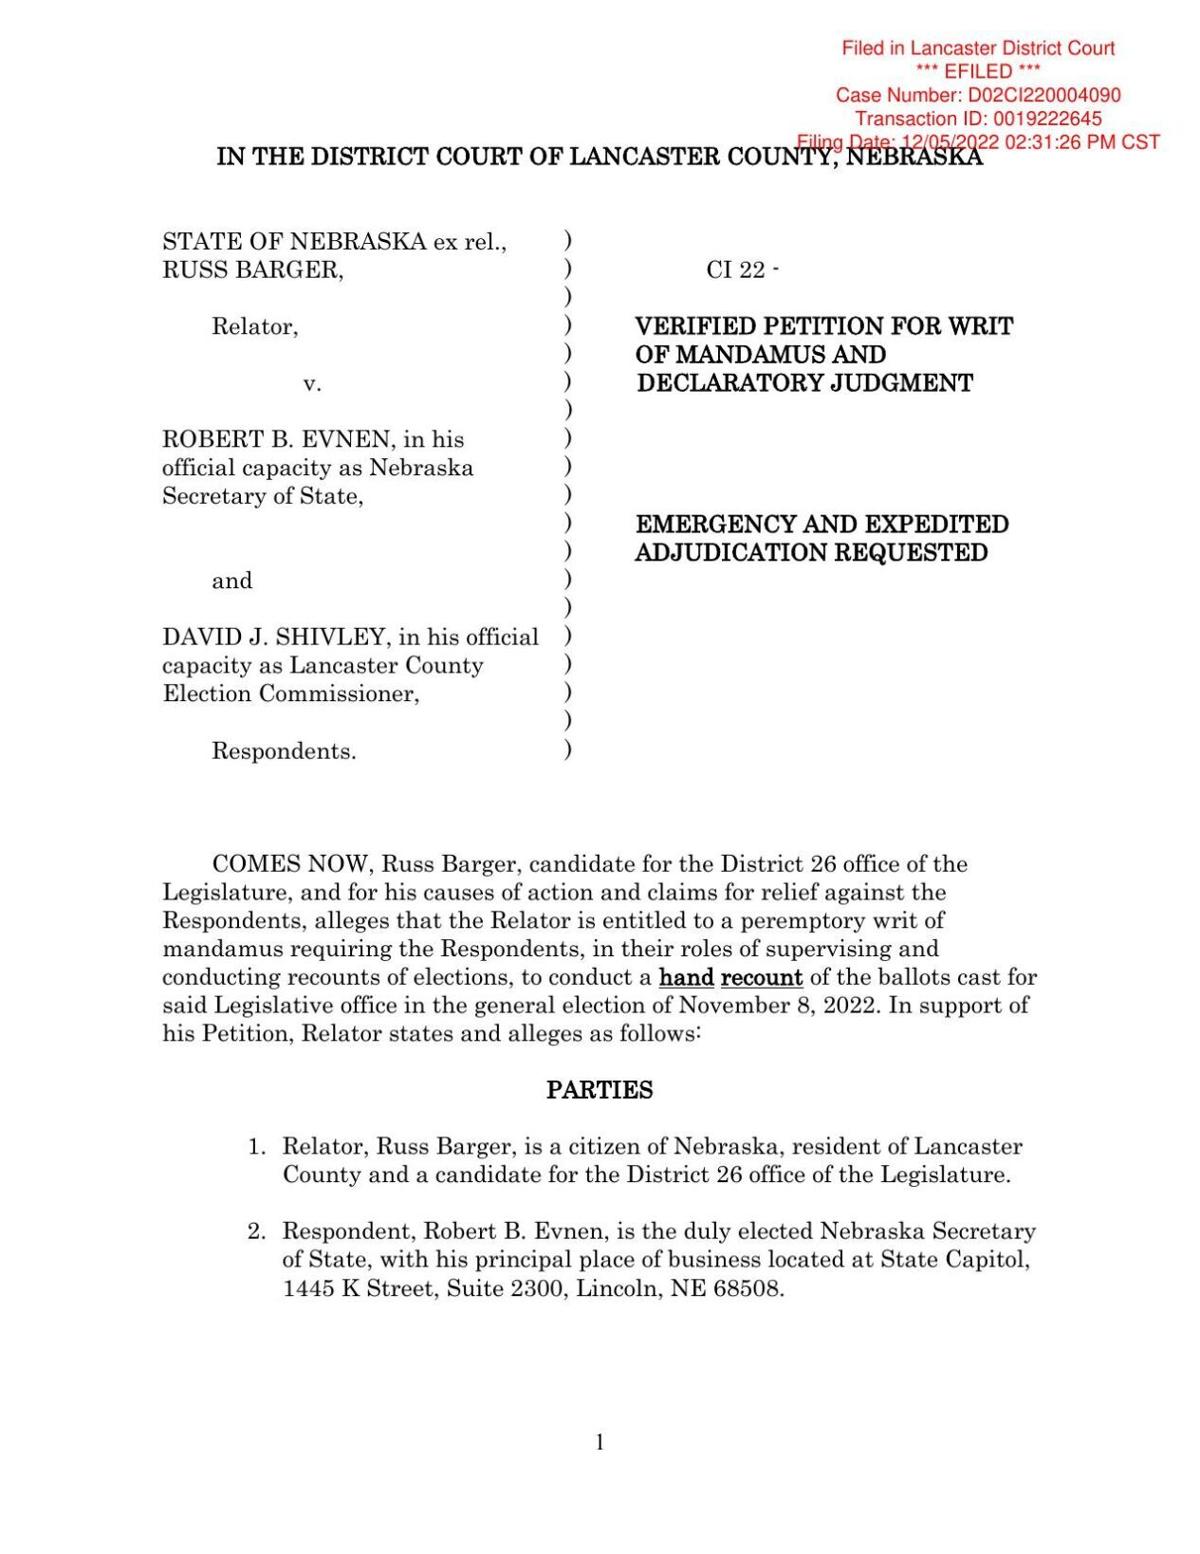 Read Russ Barger's lawsuit against Secretary of State Bob Evnen